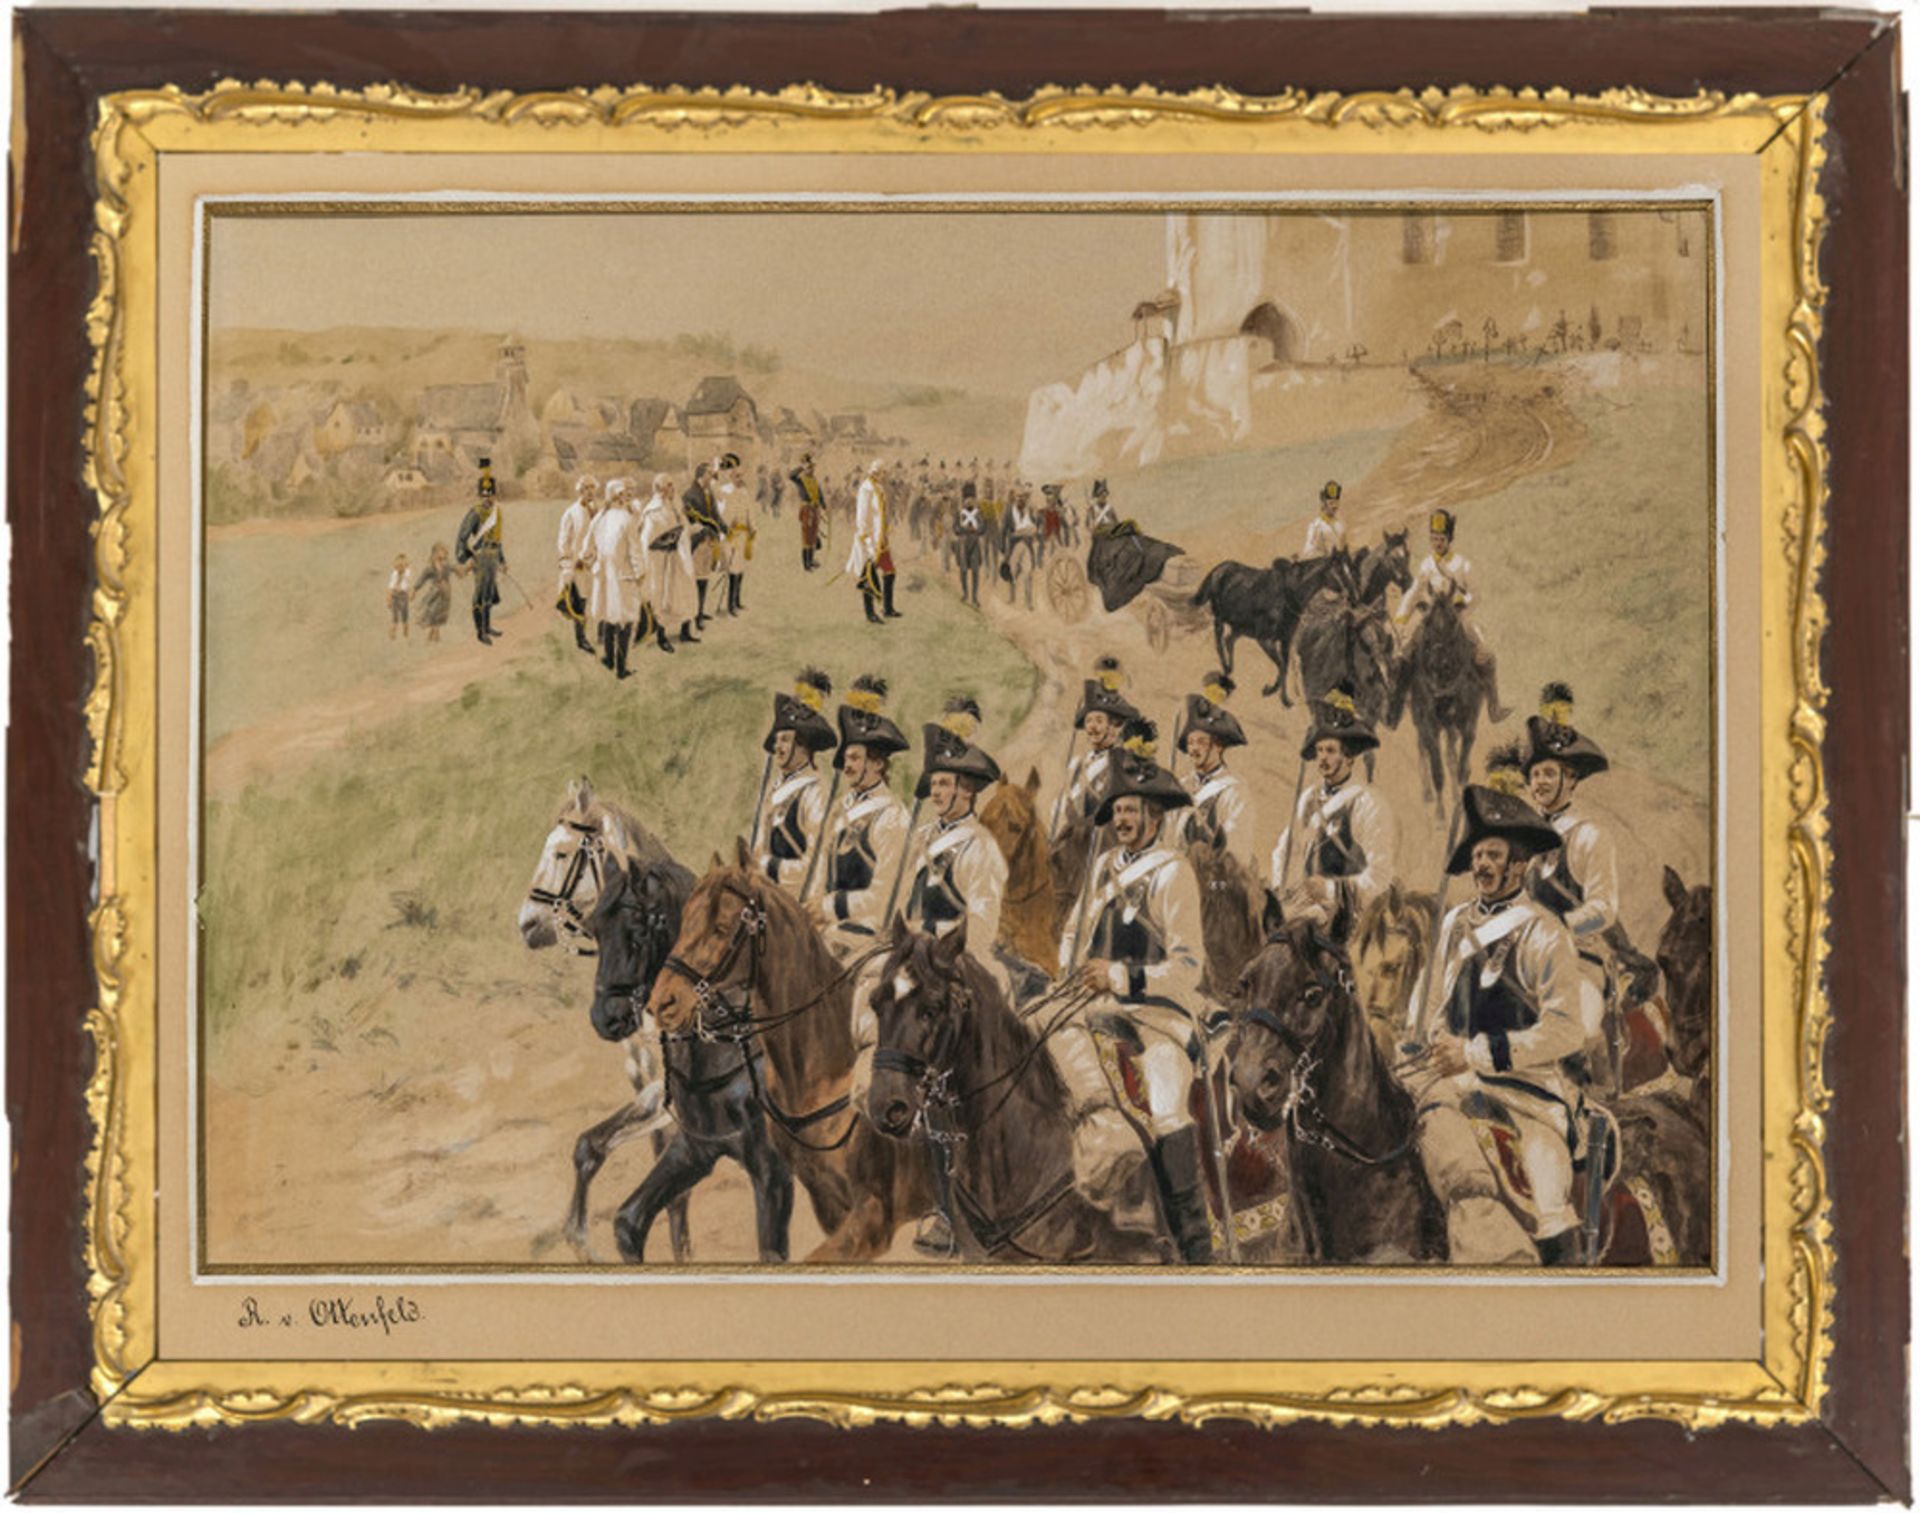 Archduke Charles conveys the body of General Marceau to the French forward posts - Image 4 of 4